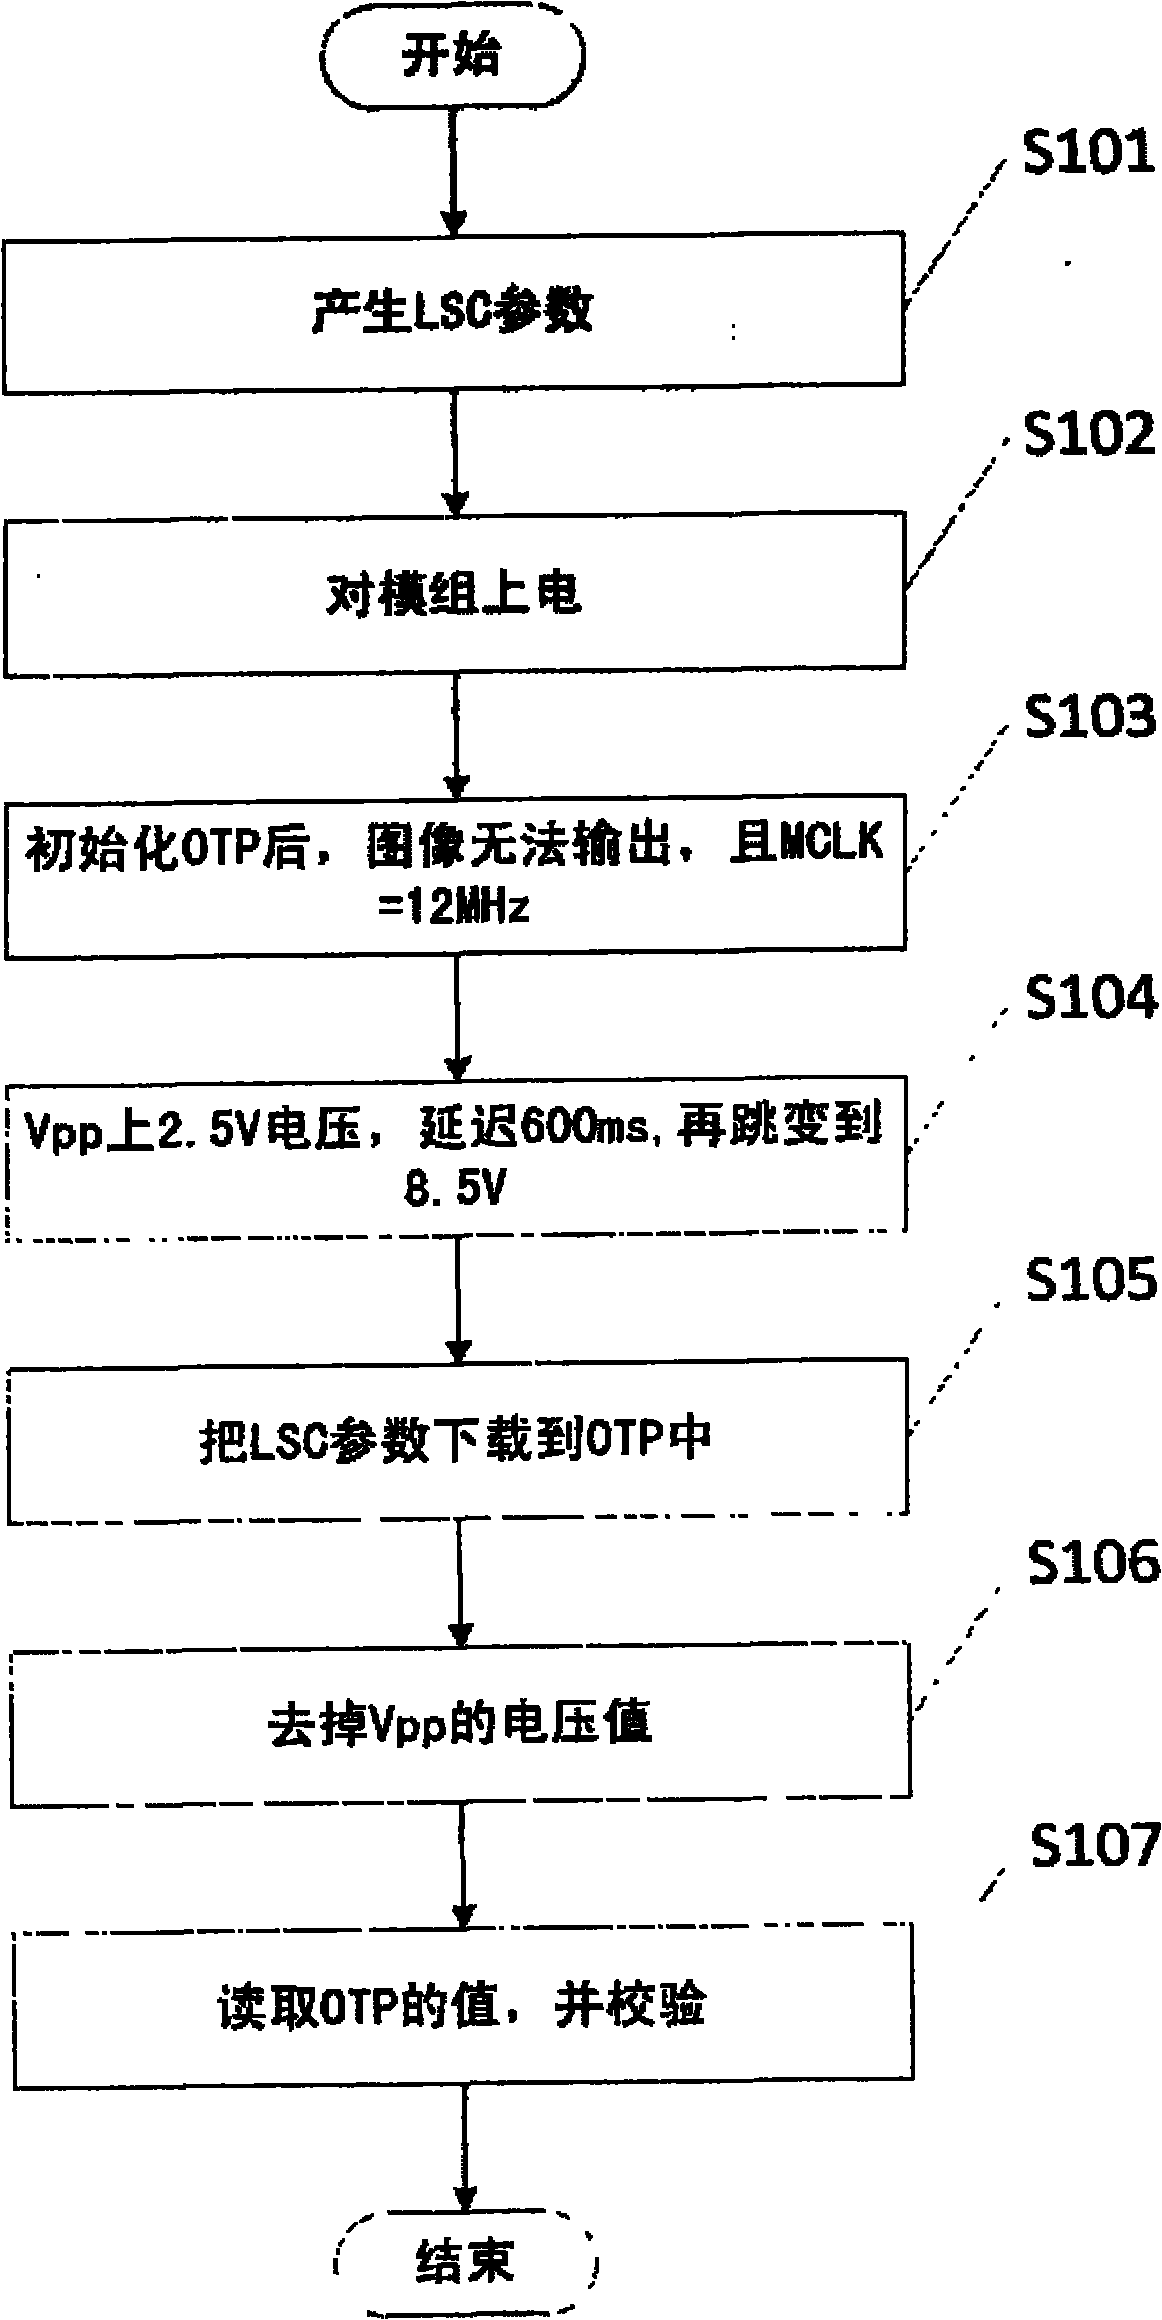 High-pixel photographic module and burning method for chip